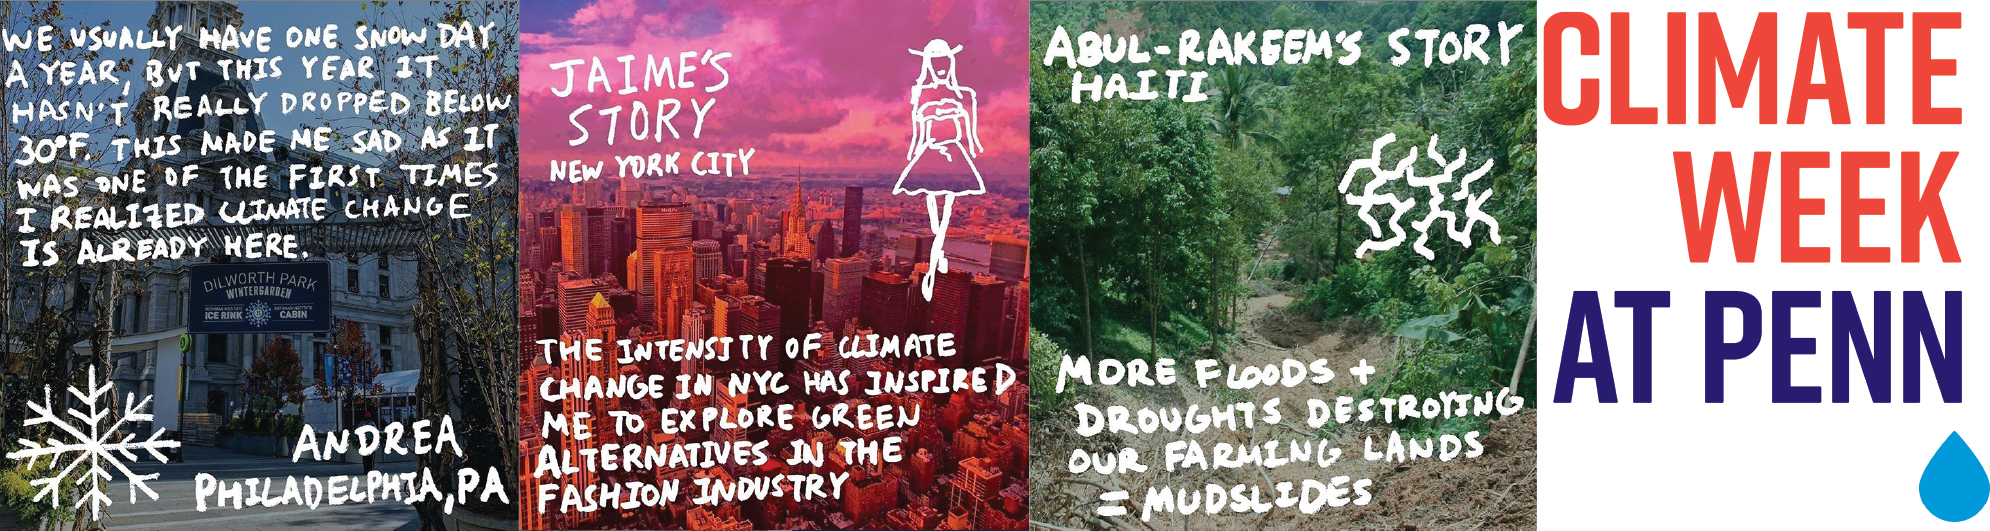 three selected climate stories in blue, pink, and green, and the climate week at penn logo